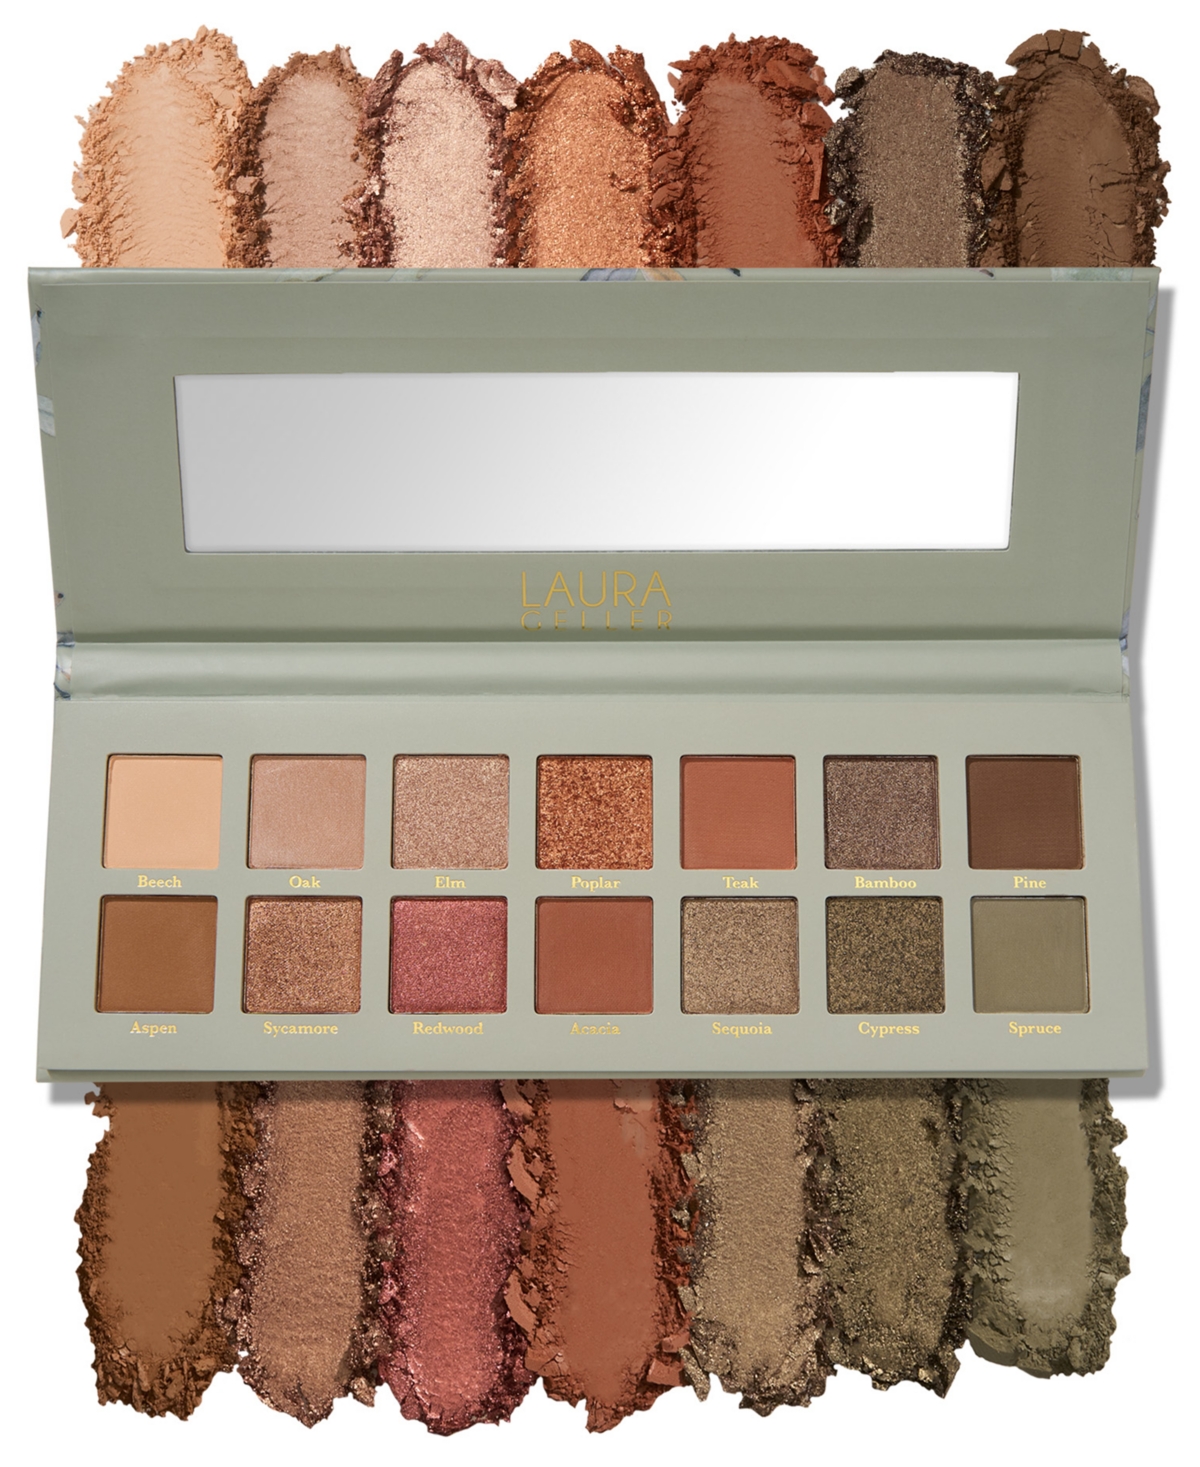 The Casual Collection 14 Multi-Finish Eyeshadows Palette - Copper  Khaki